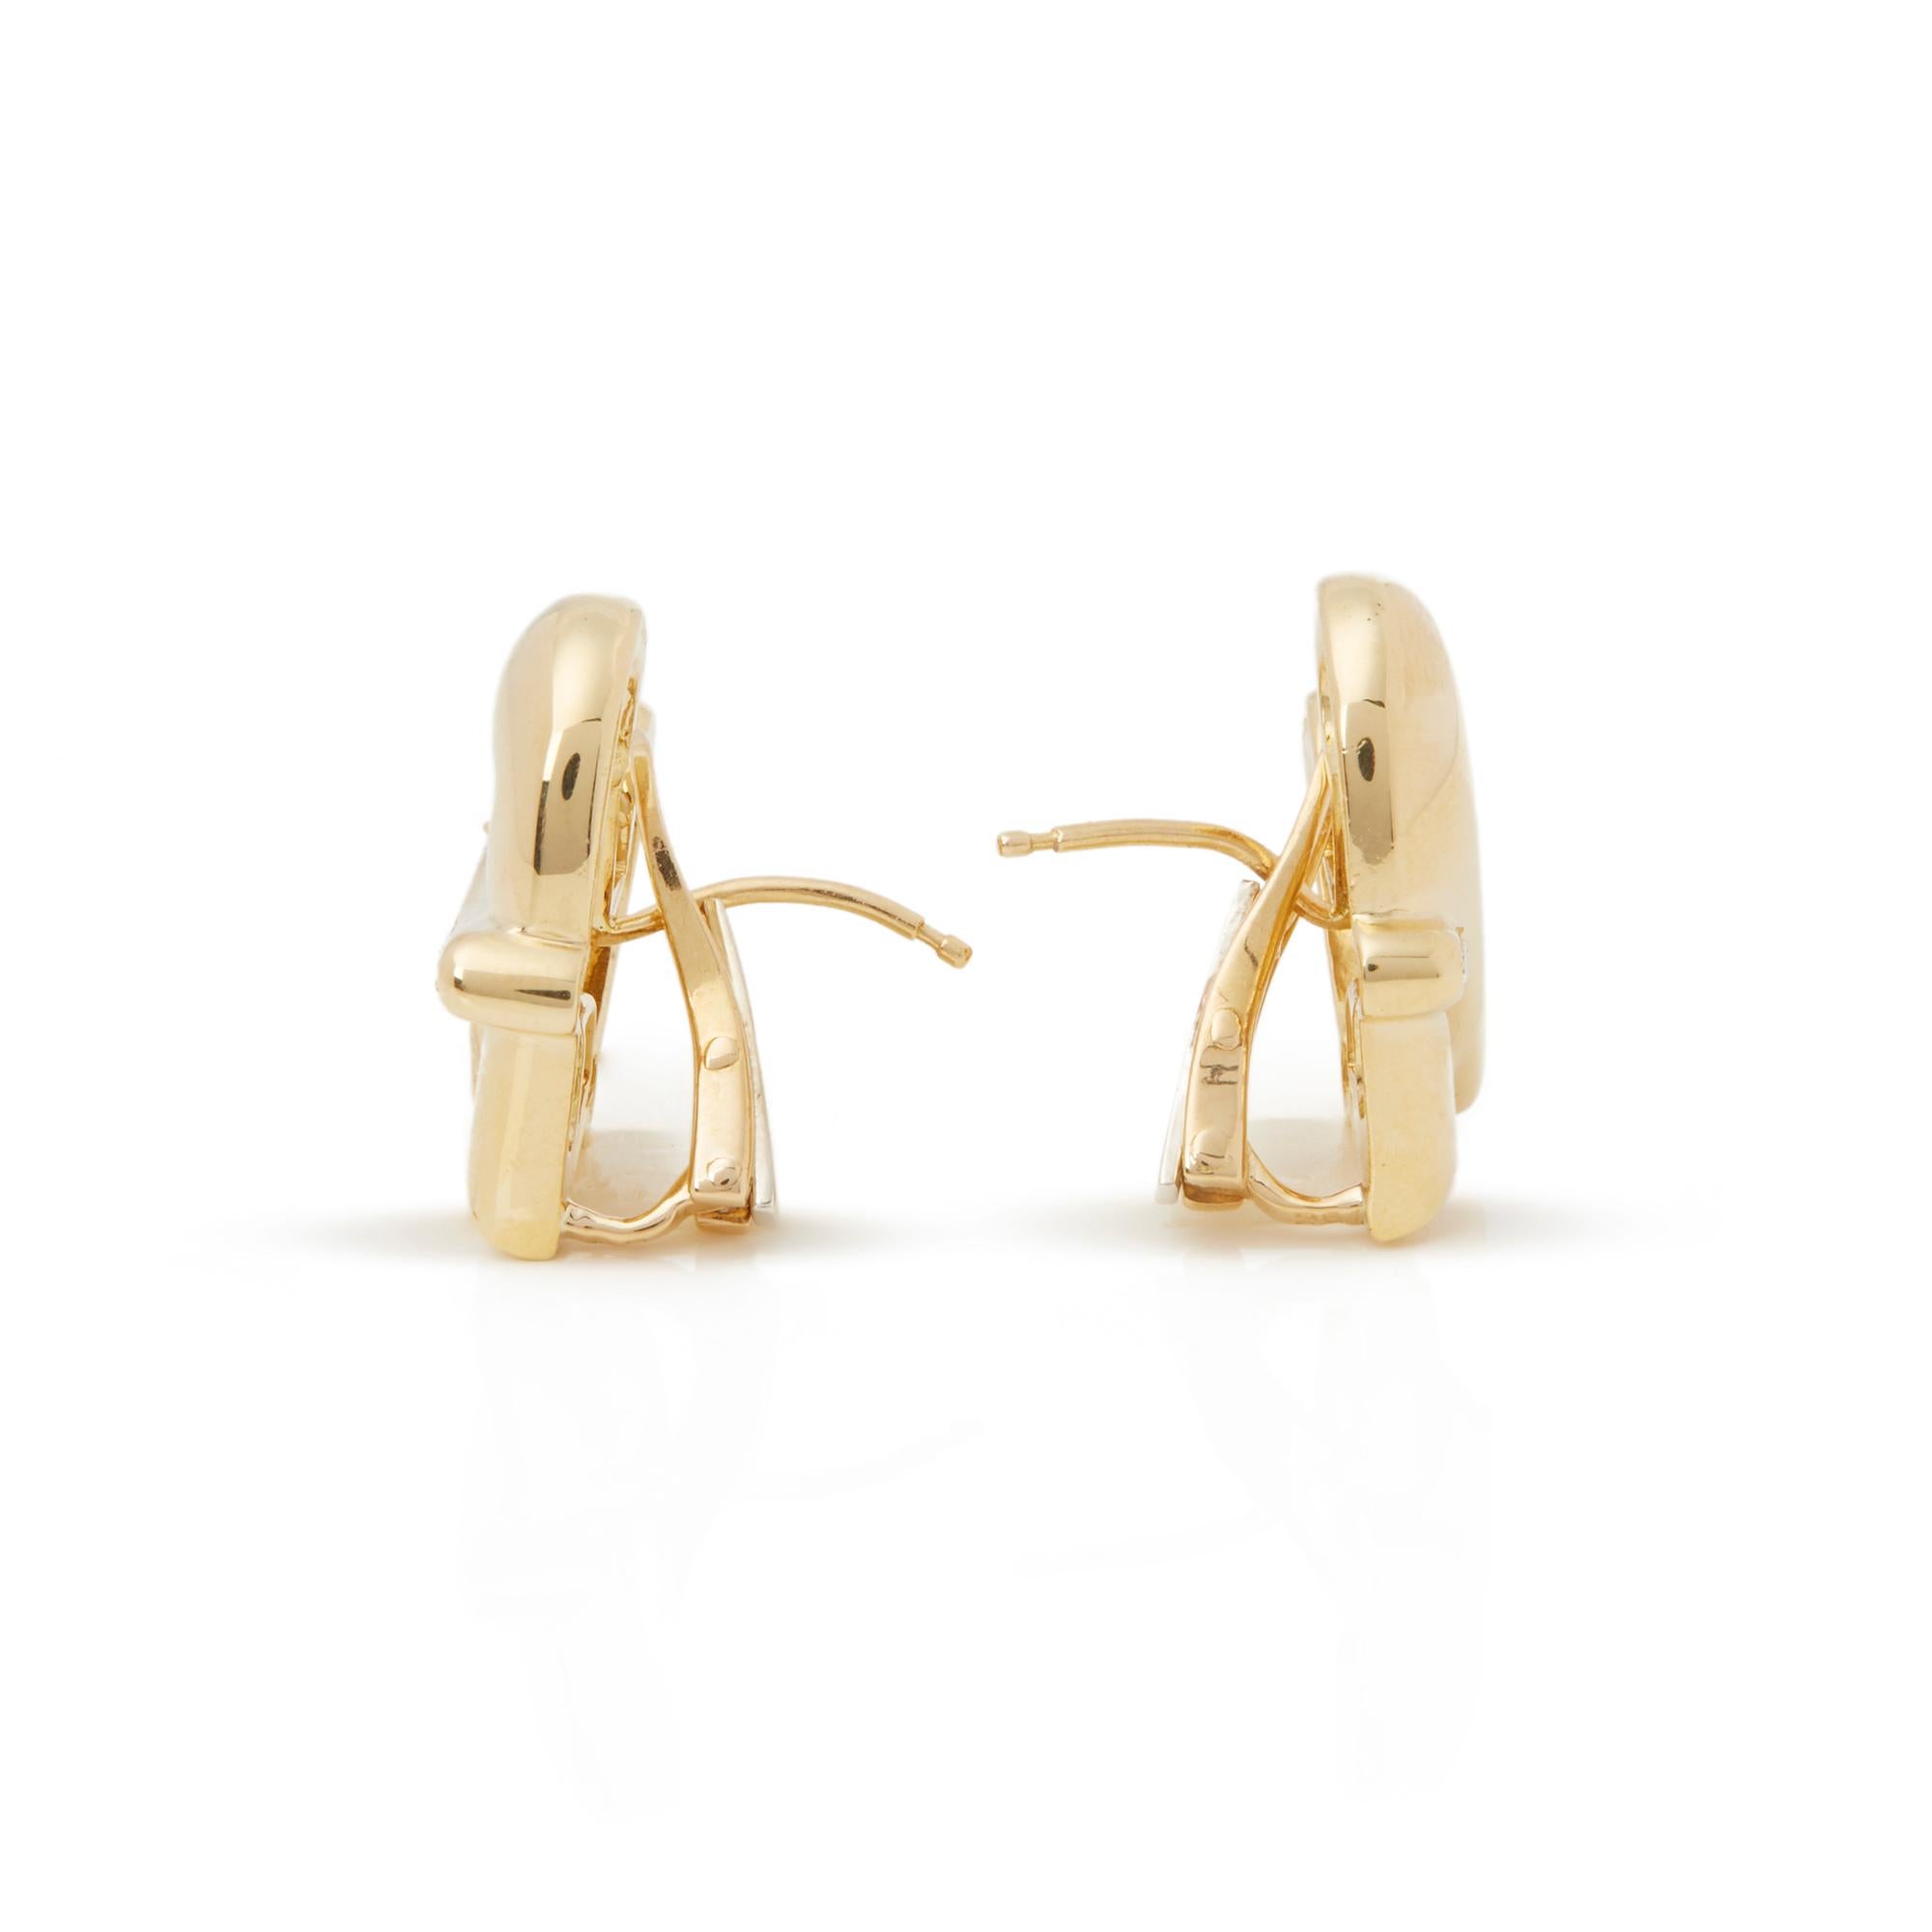 Code: COM2188
Brand: Boodles
Description: 18k Yellow Gold Diamond Hug Earrings
Accompanied With: Presentation Box
Gender: Ladies
Earring Length: 1.9cm
Earring Width: 1.9cm
Earring Back: Omega
Condition: 8
Material: Yellow Gold
Total Weight: 15.67g